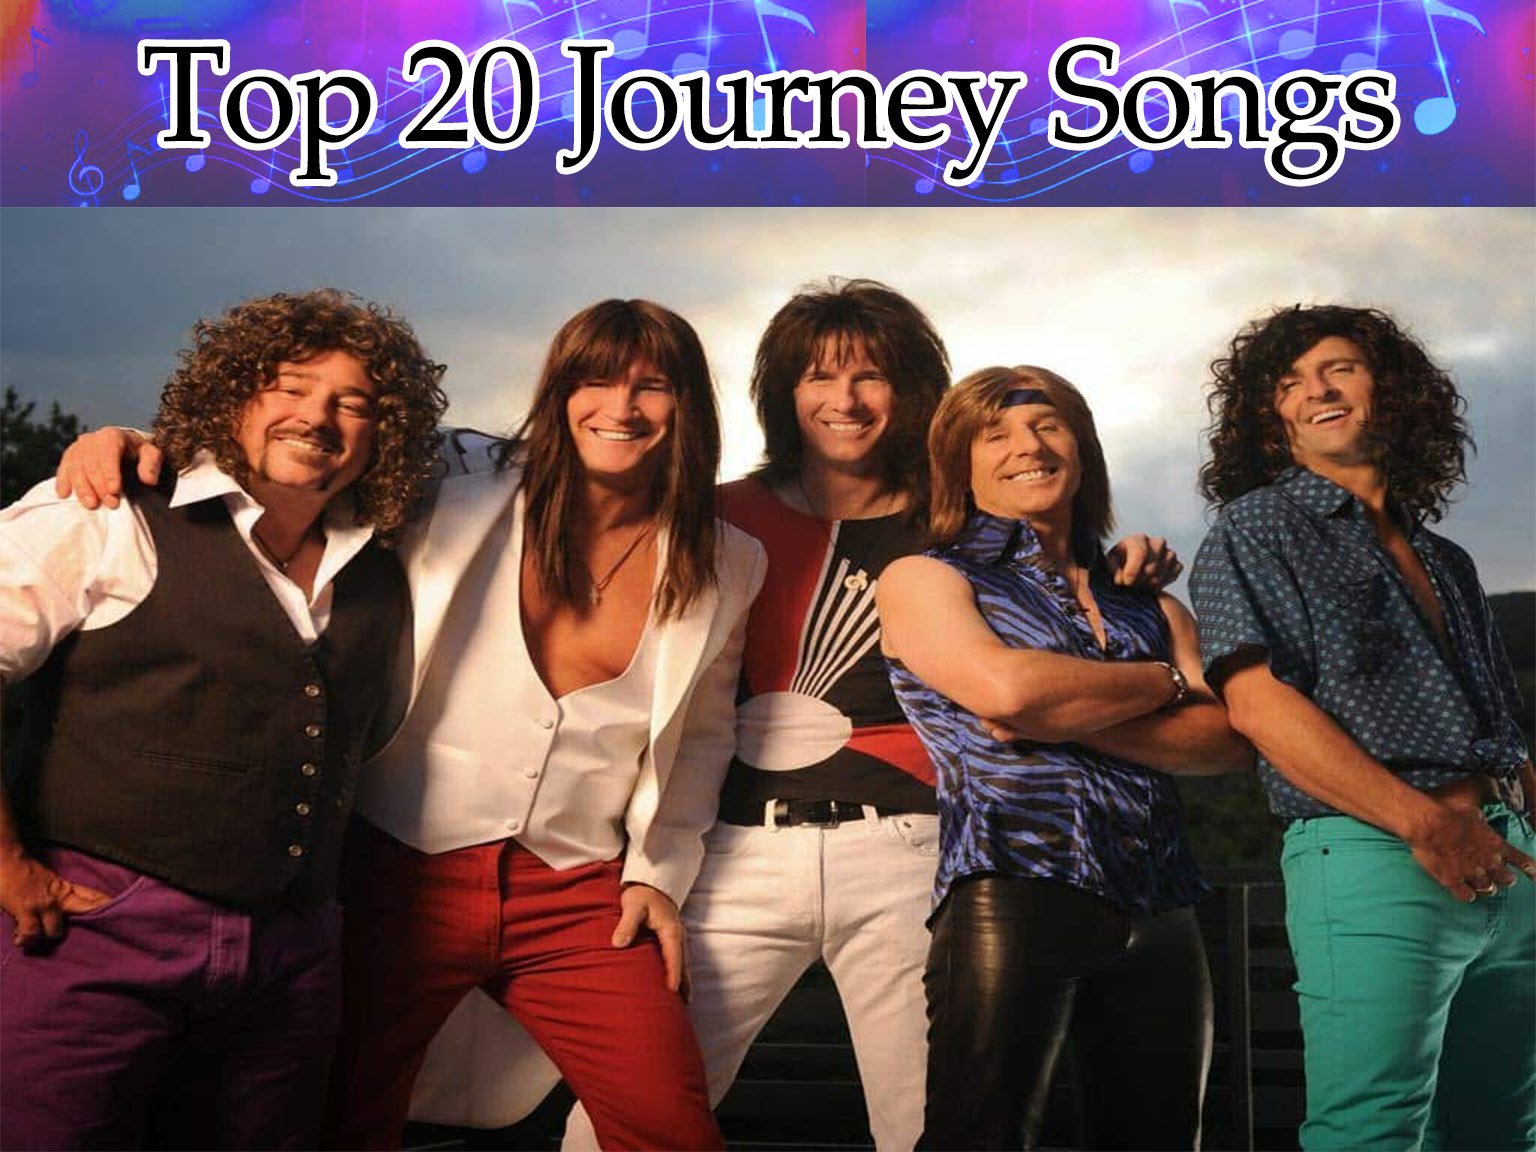 Top 20 Journey songs: Reliving the Rock Magic